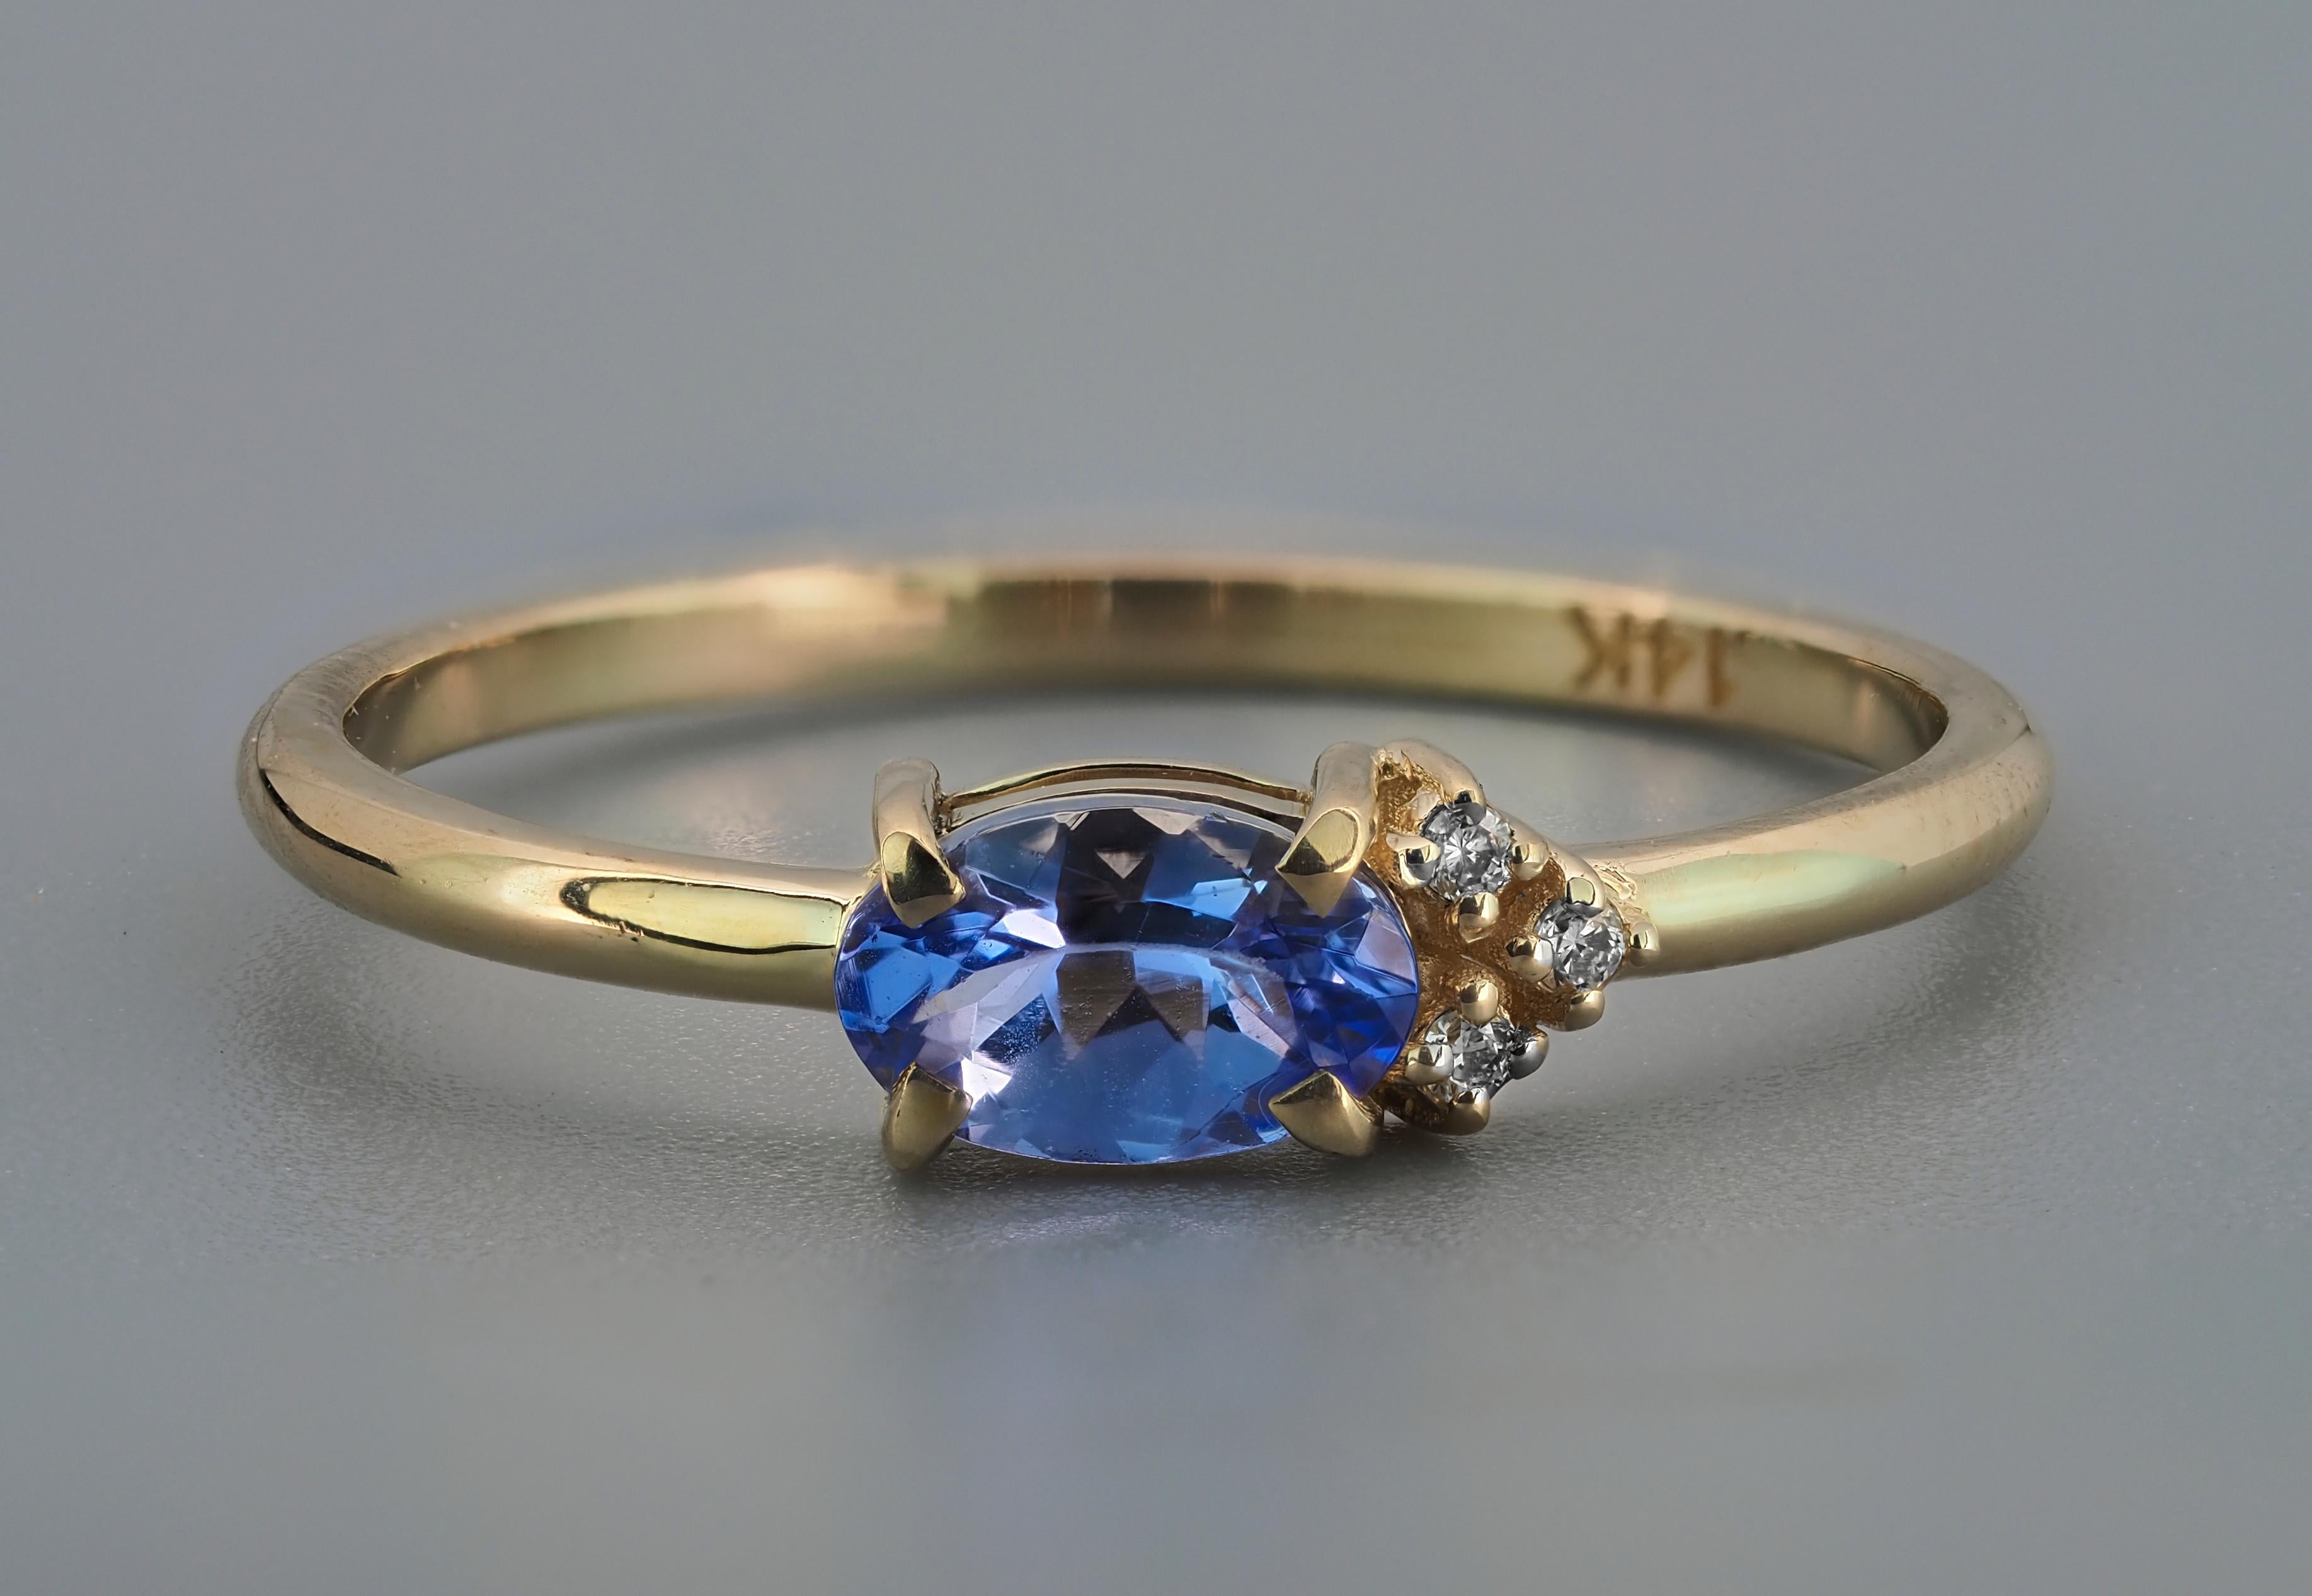 Tanzanite stackable 14k gold ring. 
Oval tanzanite ring. Tanzanite and diamonds ring. Tanzanite delicate ring. Tanzanite casual ring.

Weight: 2 g. depends from size
Metal - 14k  gold.

Central stone: Tanzanite
Cut: oval
Weight: aprox